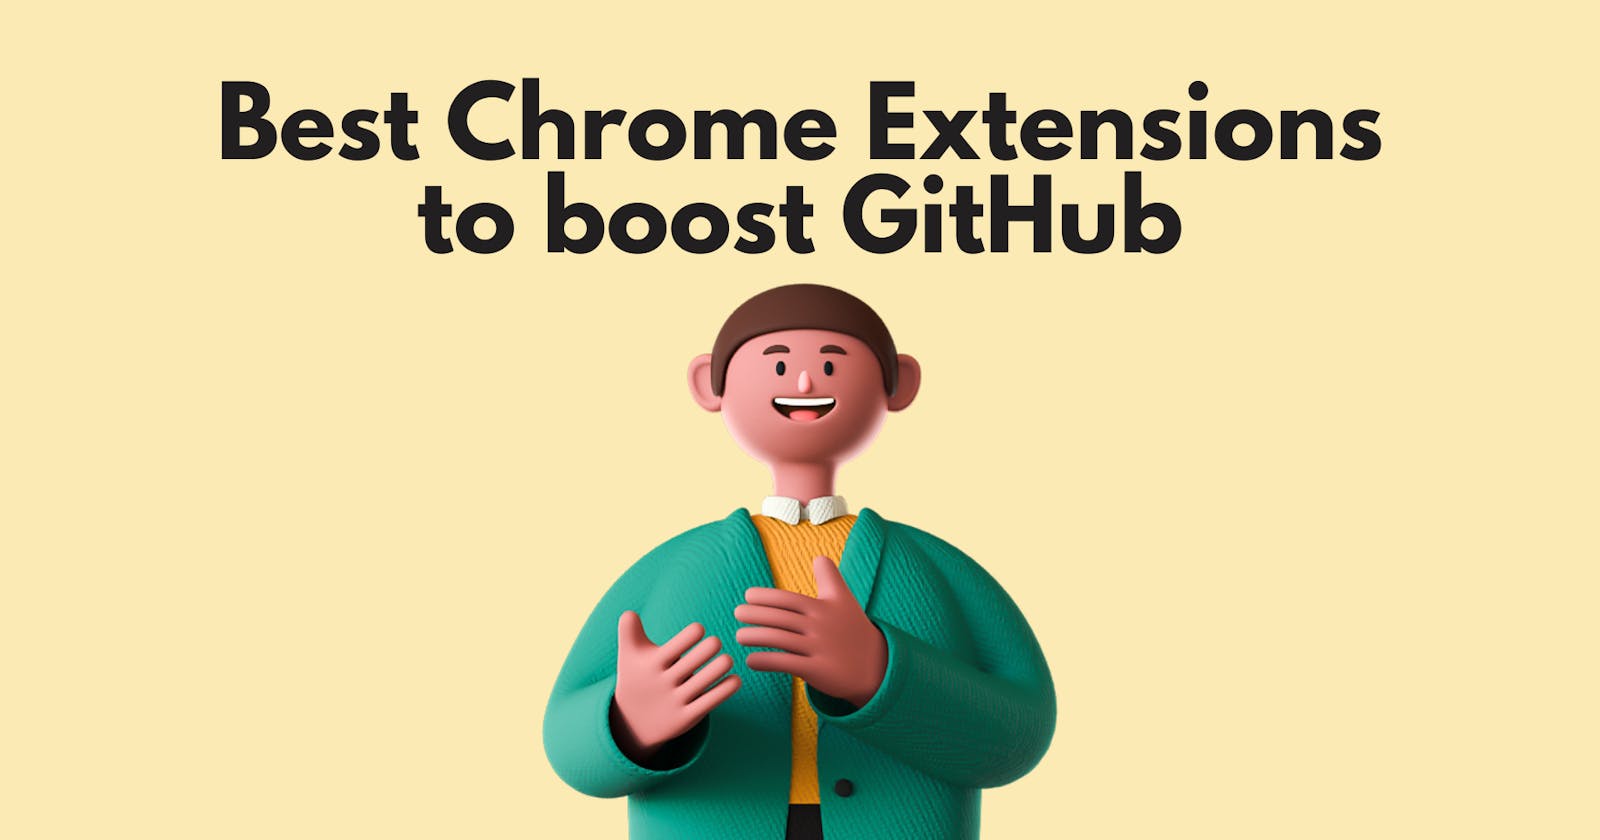 Best Chrome Extensions to boost GitHub